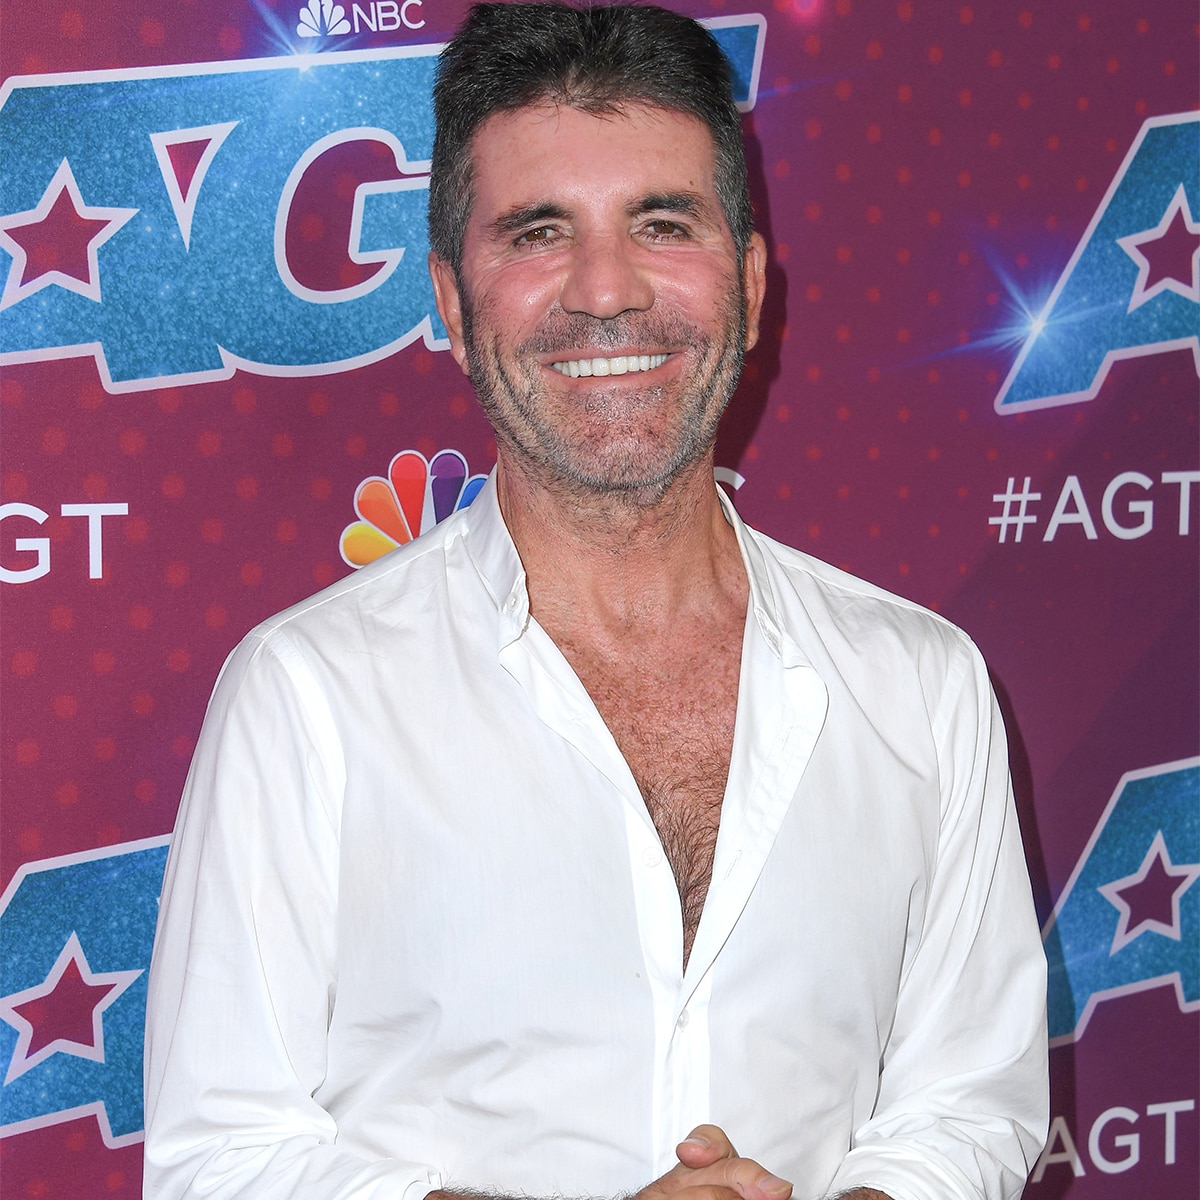 Find Out Why Simon Cowell Backed Out of Having His Own Talk Show